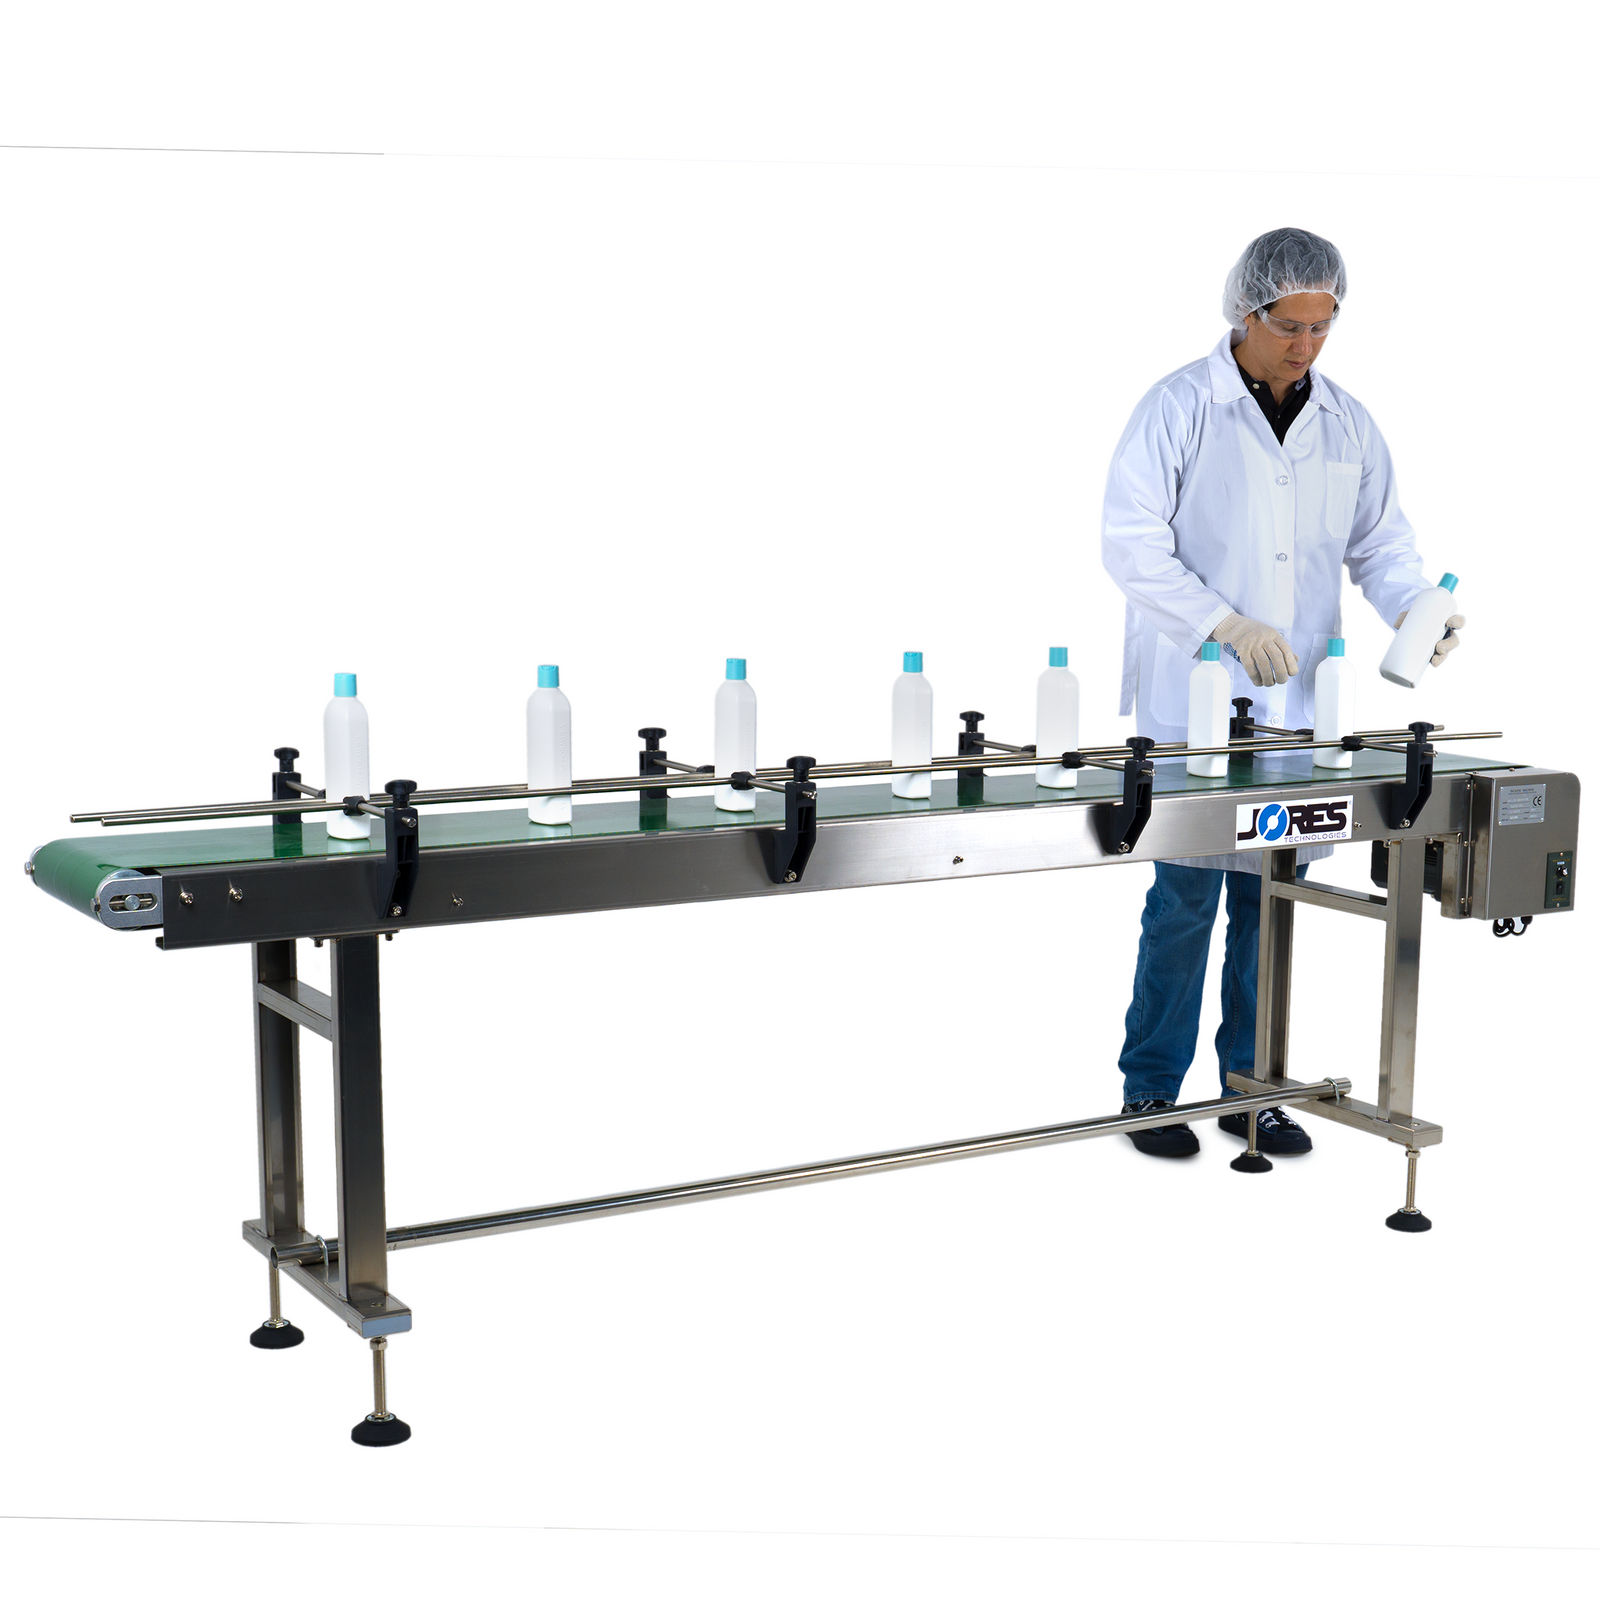 Operator wearing white lab coat and blue gloves adjusting white milk bottles on motorized conveyor with steel frame and motorized belt with side guard rails